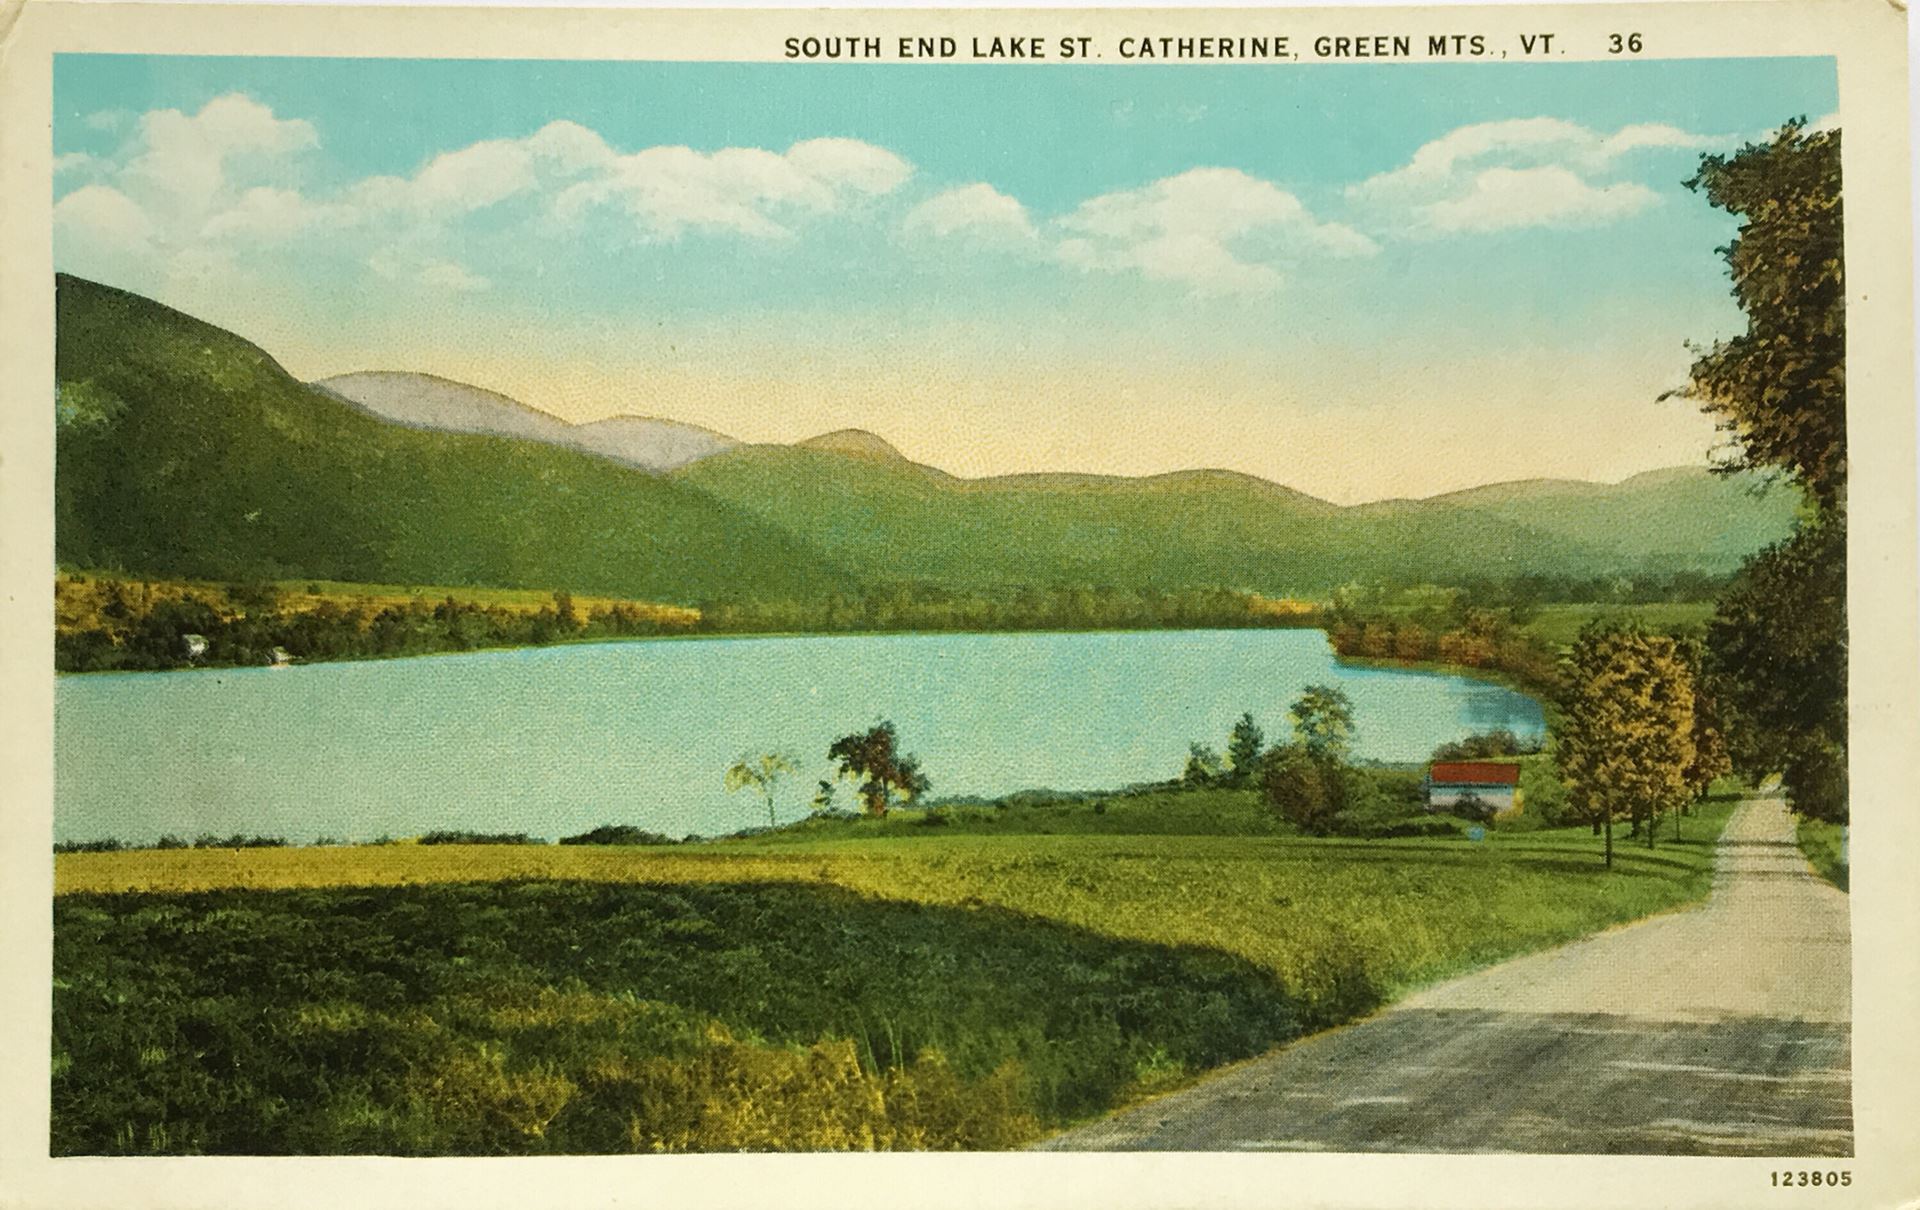 Lake St. Catherine - A scene from Little Lake